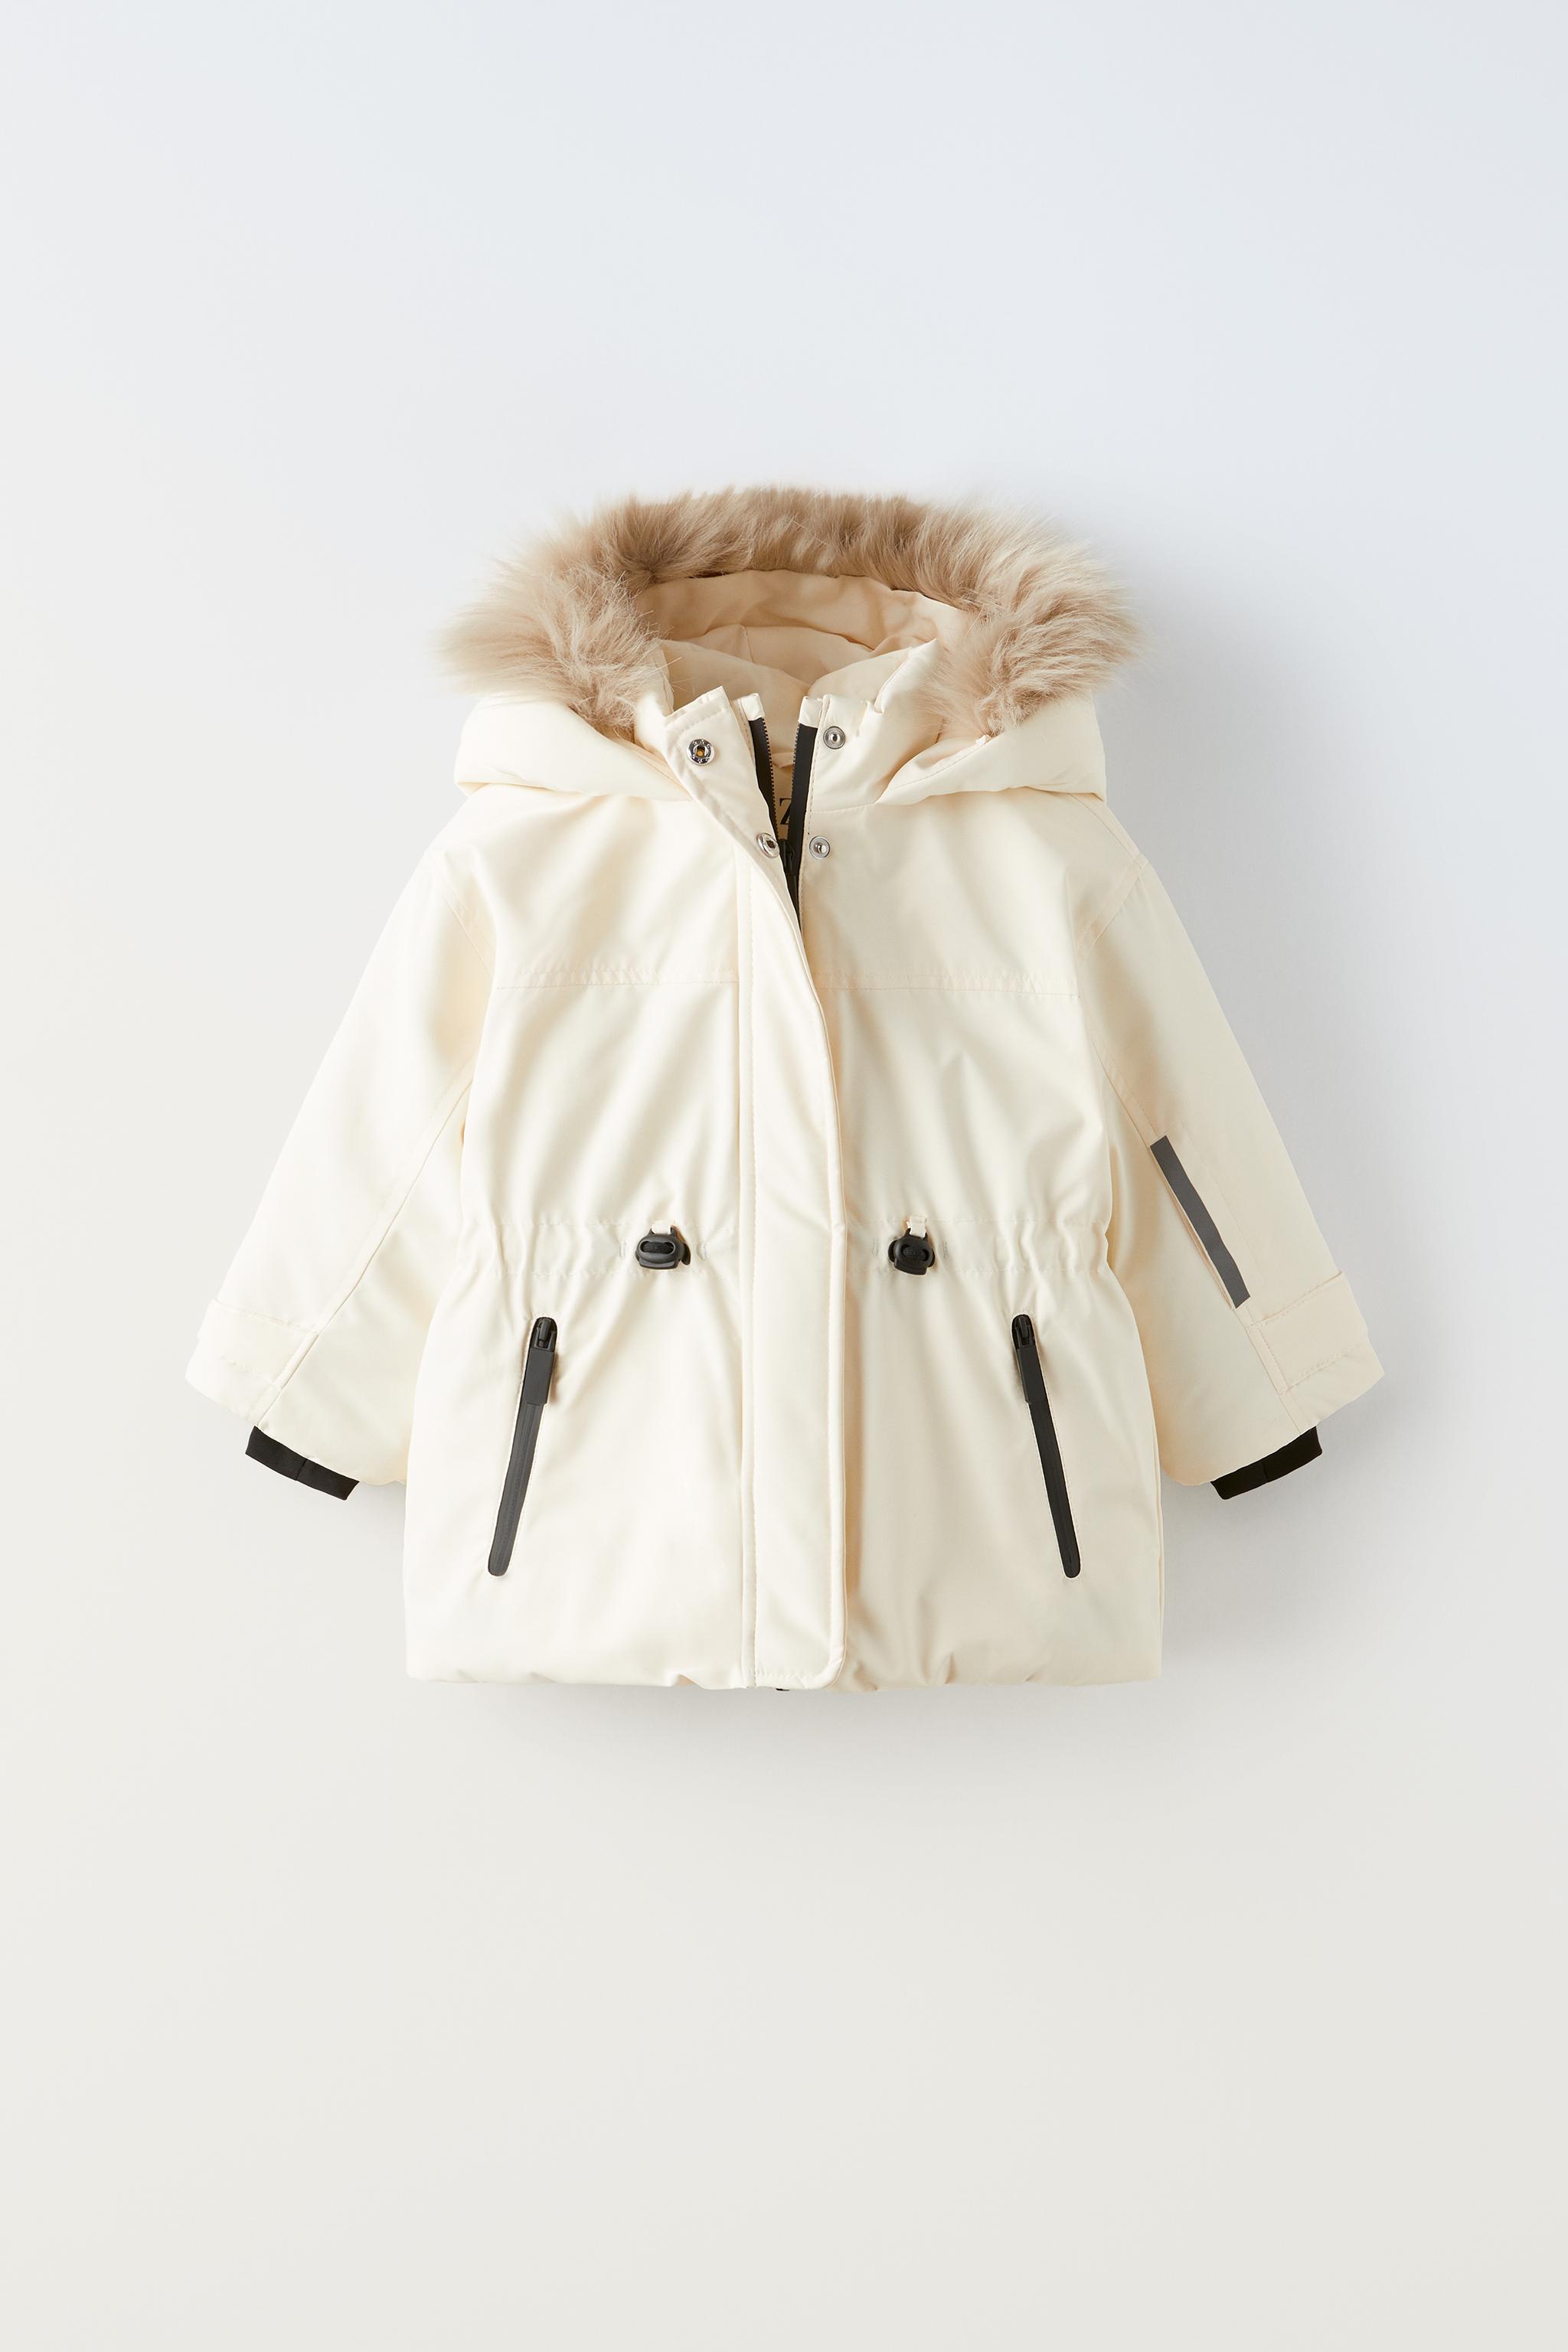 SKI COLLECTION WATER-REPELLENT AND WIND-PROTECTION アジャスタブル 